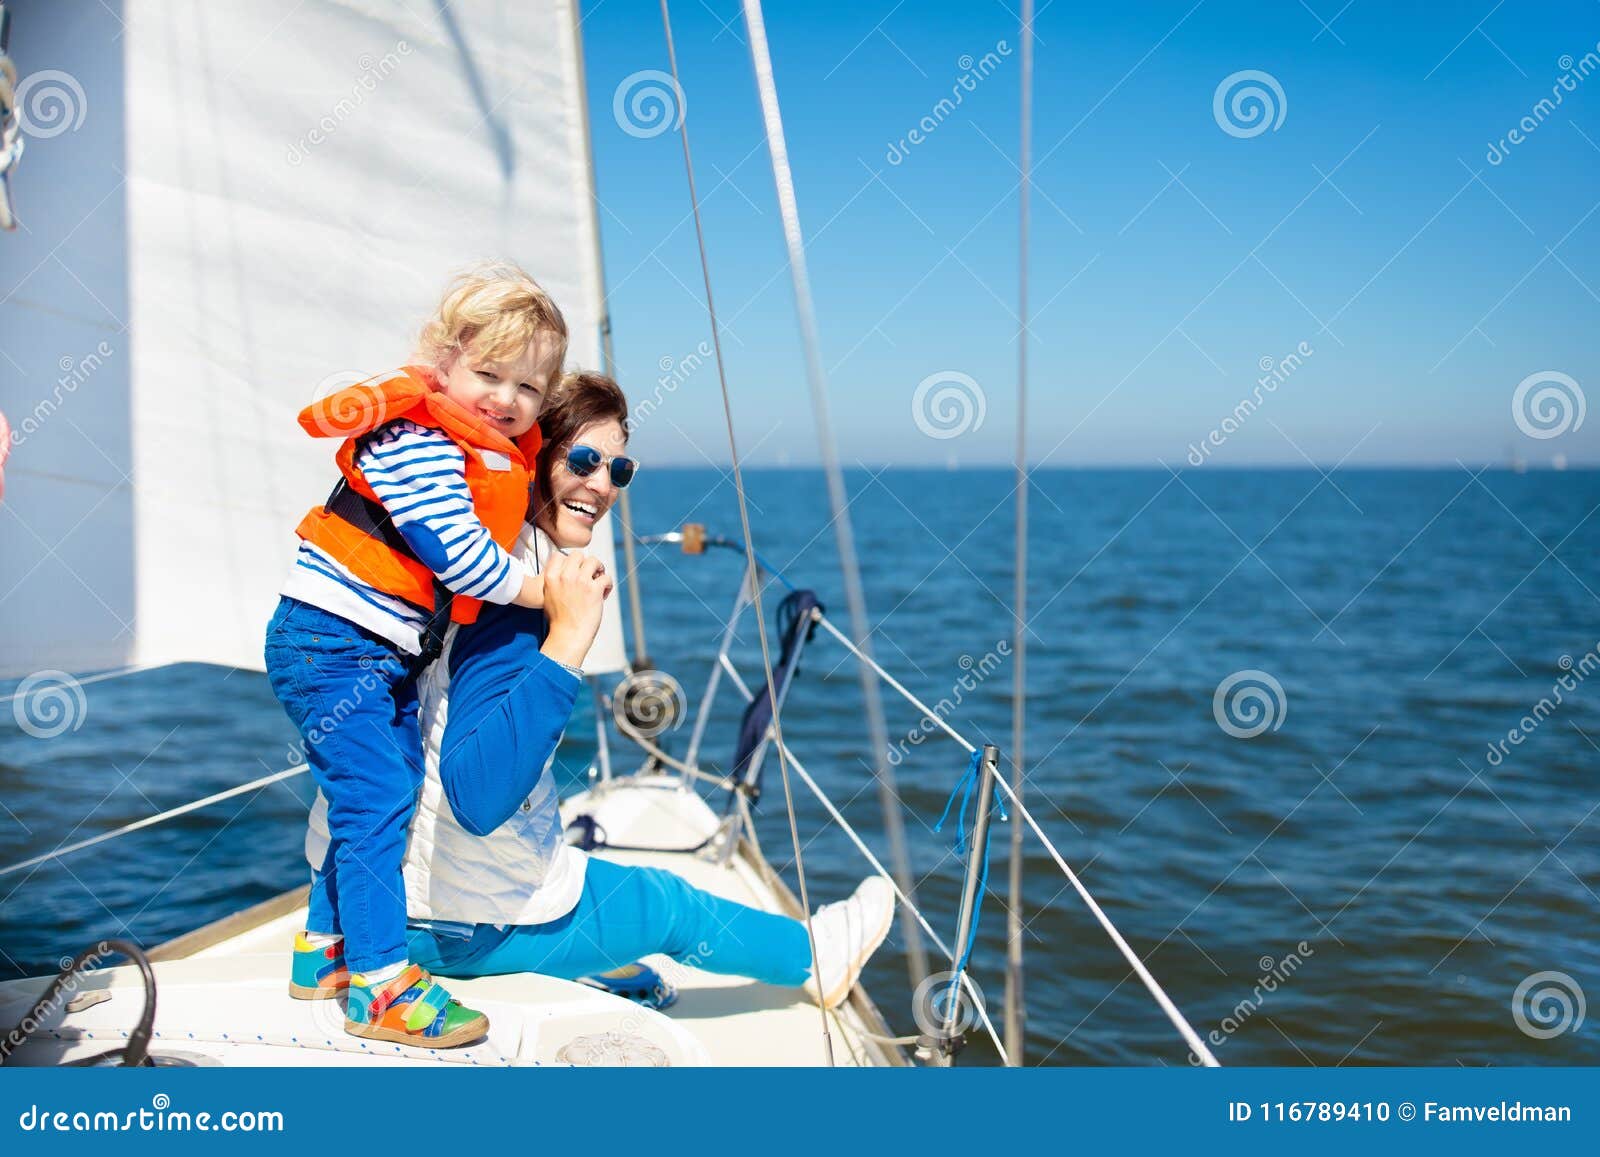 family sailing. mother and child on sea sail yacht.